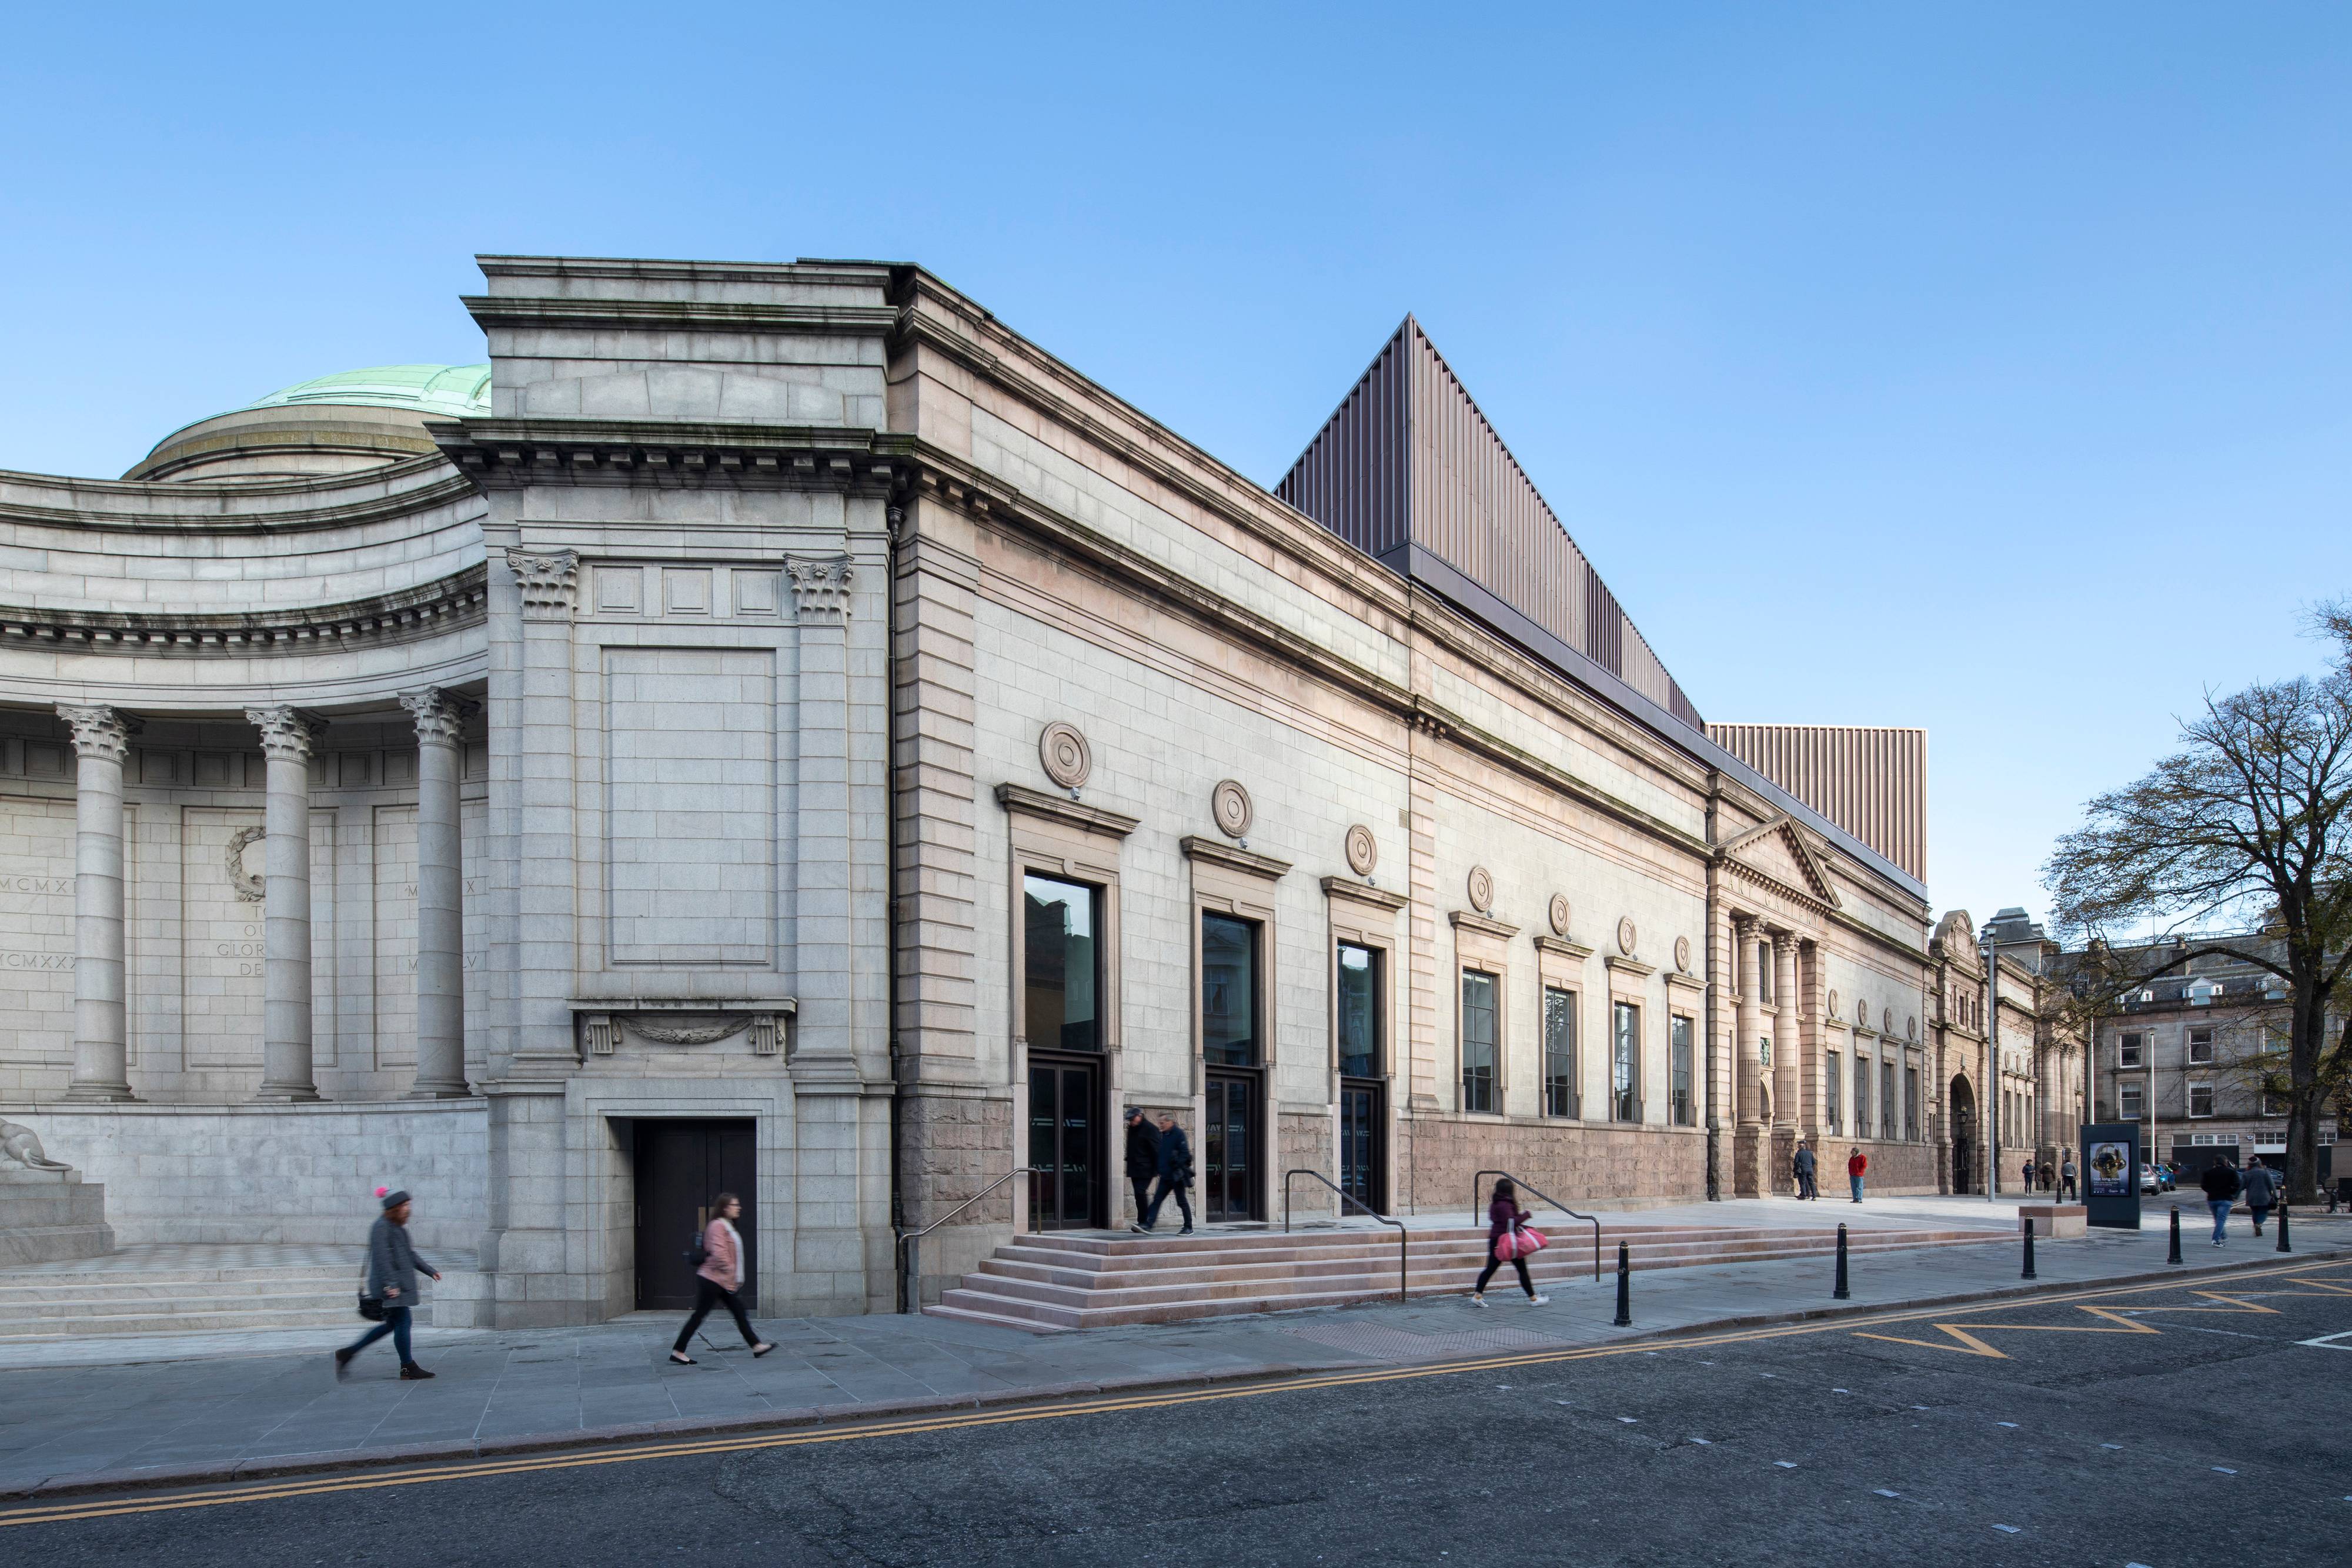 Aberdeen Art Gallery by Hoskins Architects